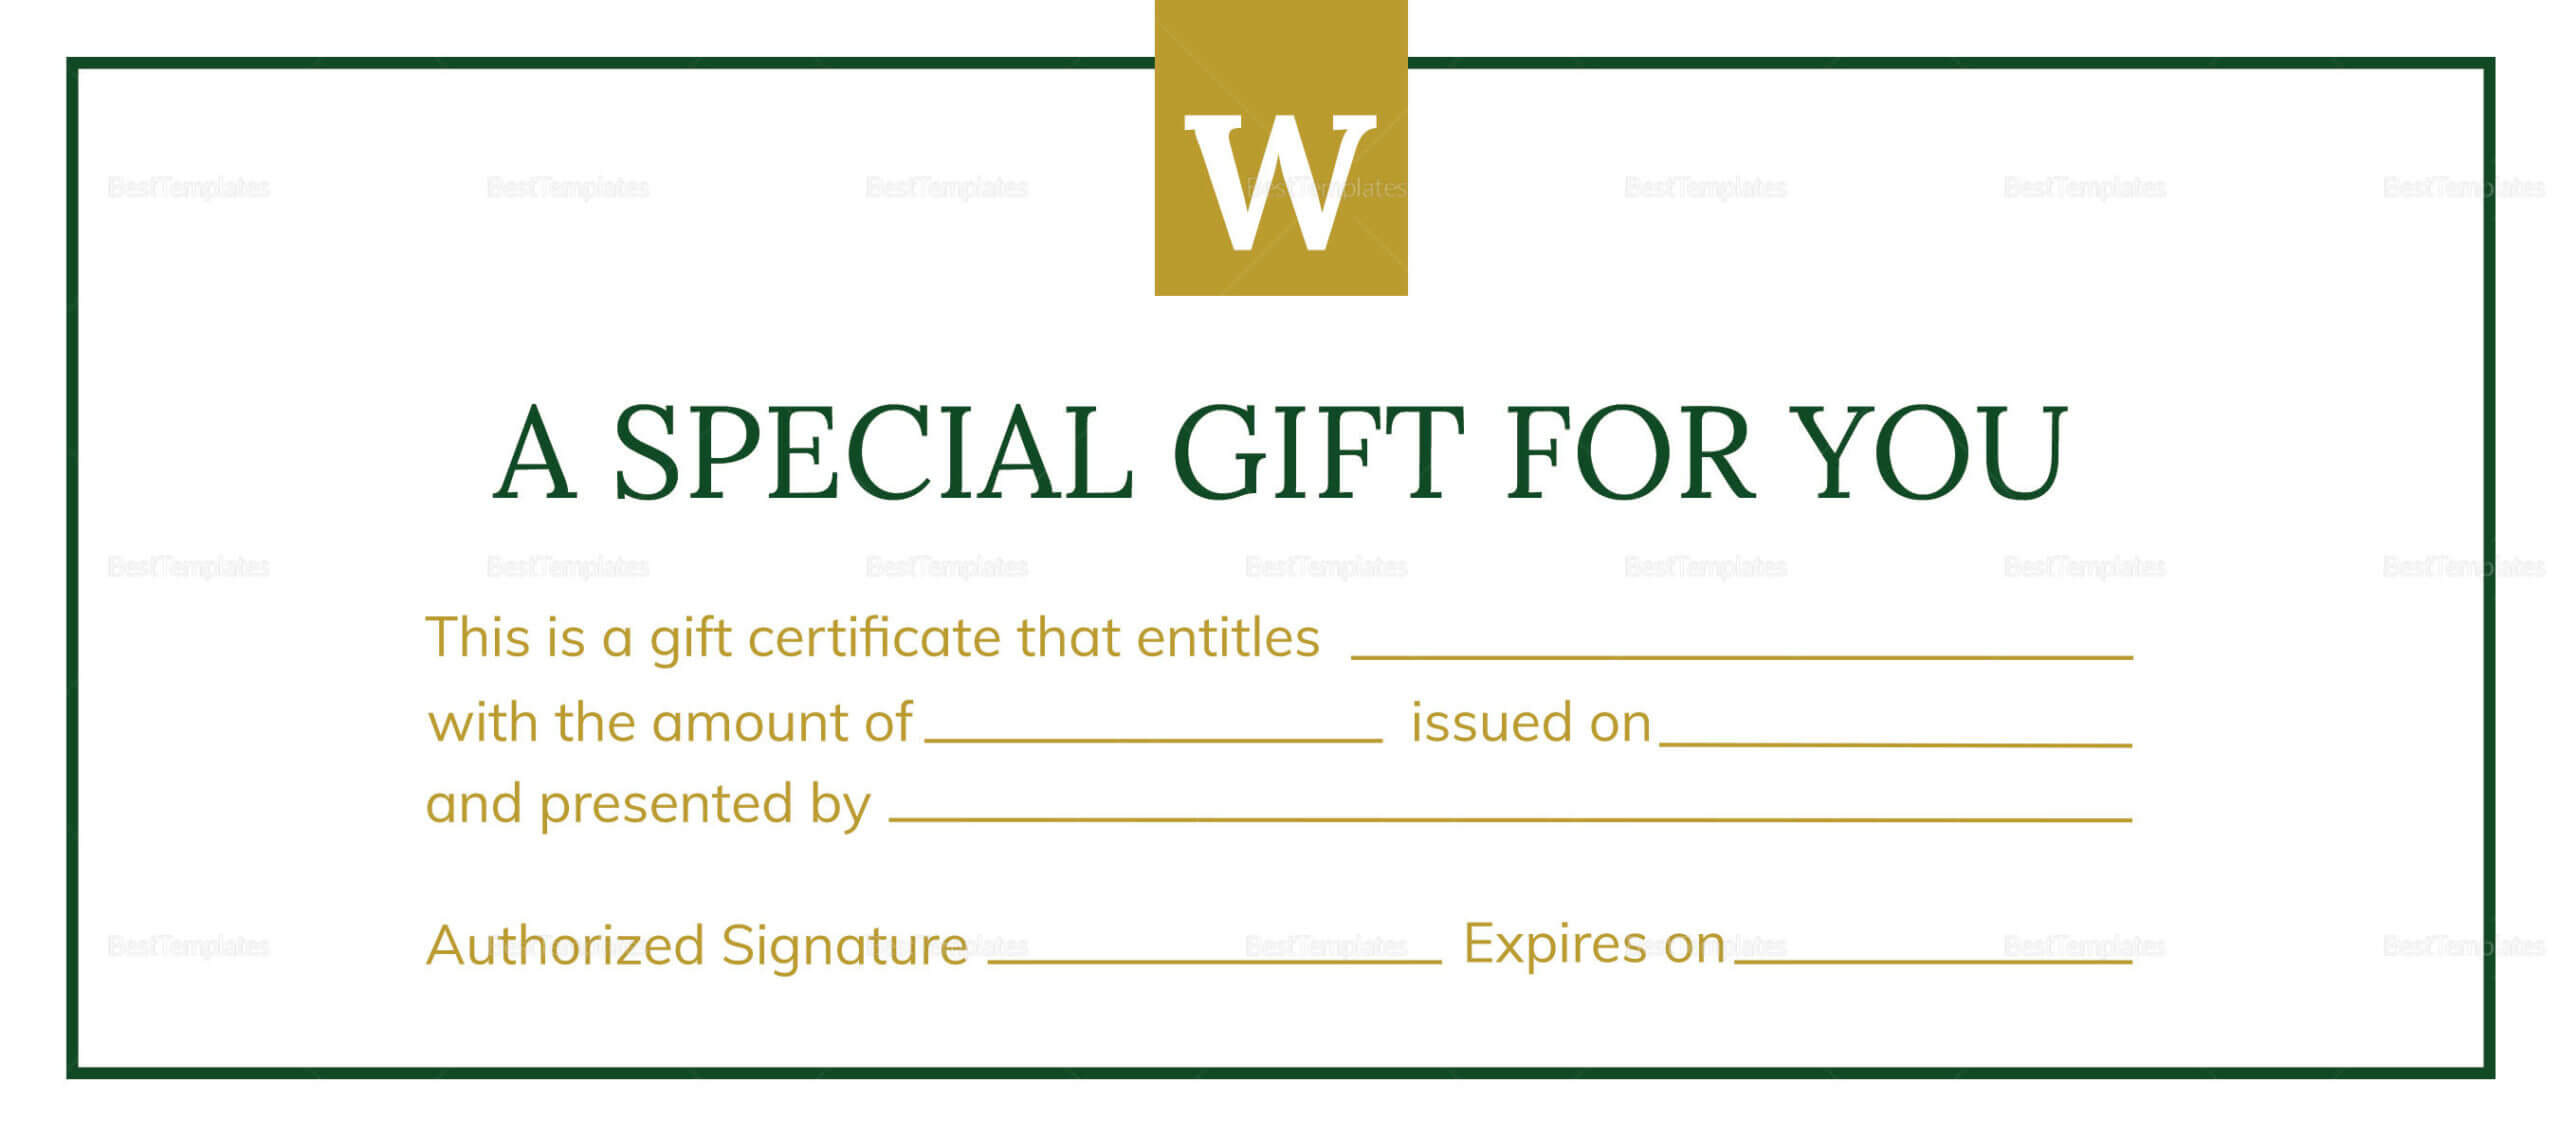 Gift Certificate Templates Indesign Illustrator Gift Coupon Pertaining To Indesign Gift Certificate Template